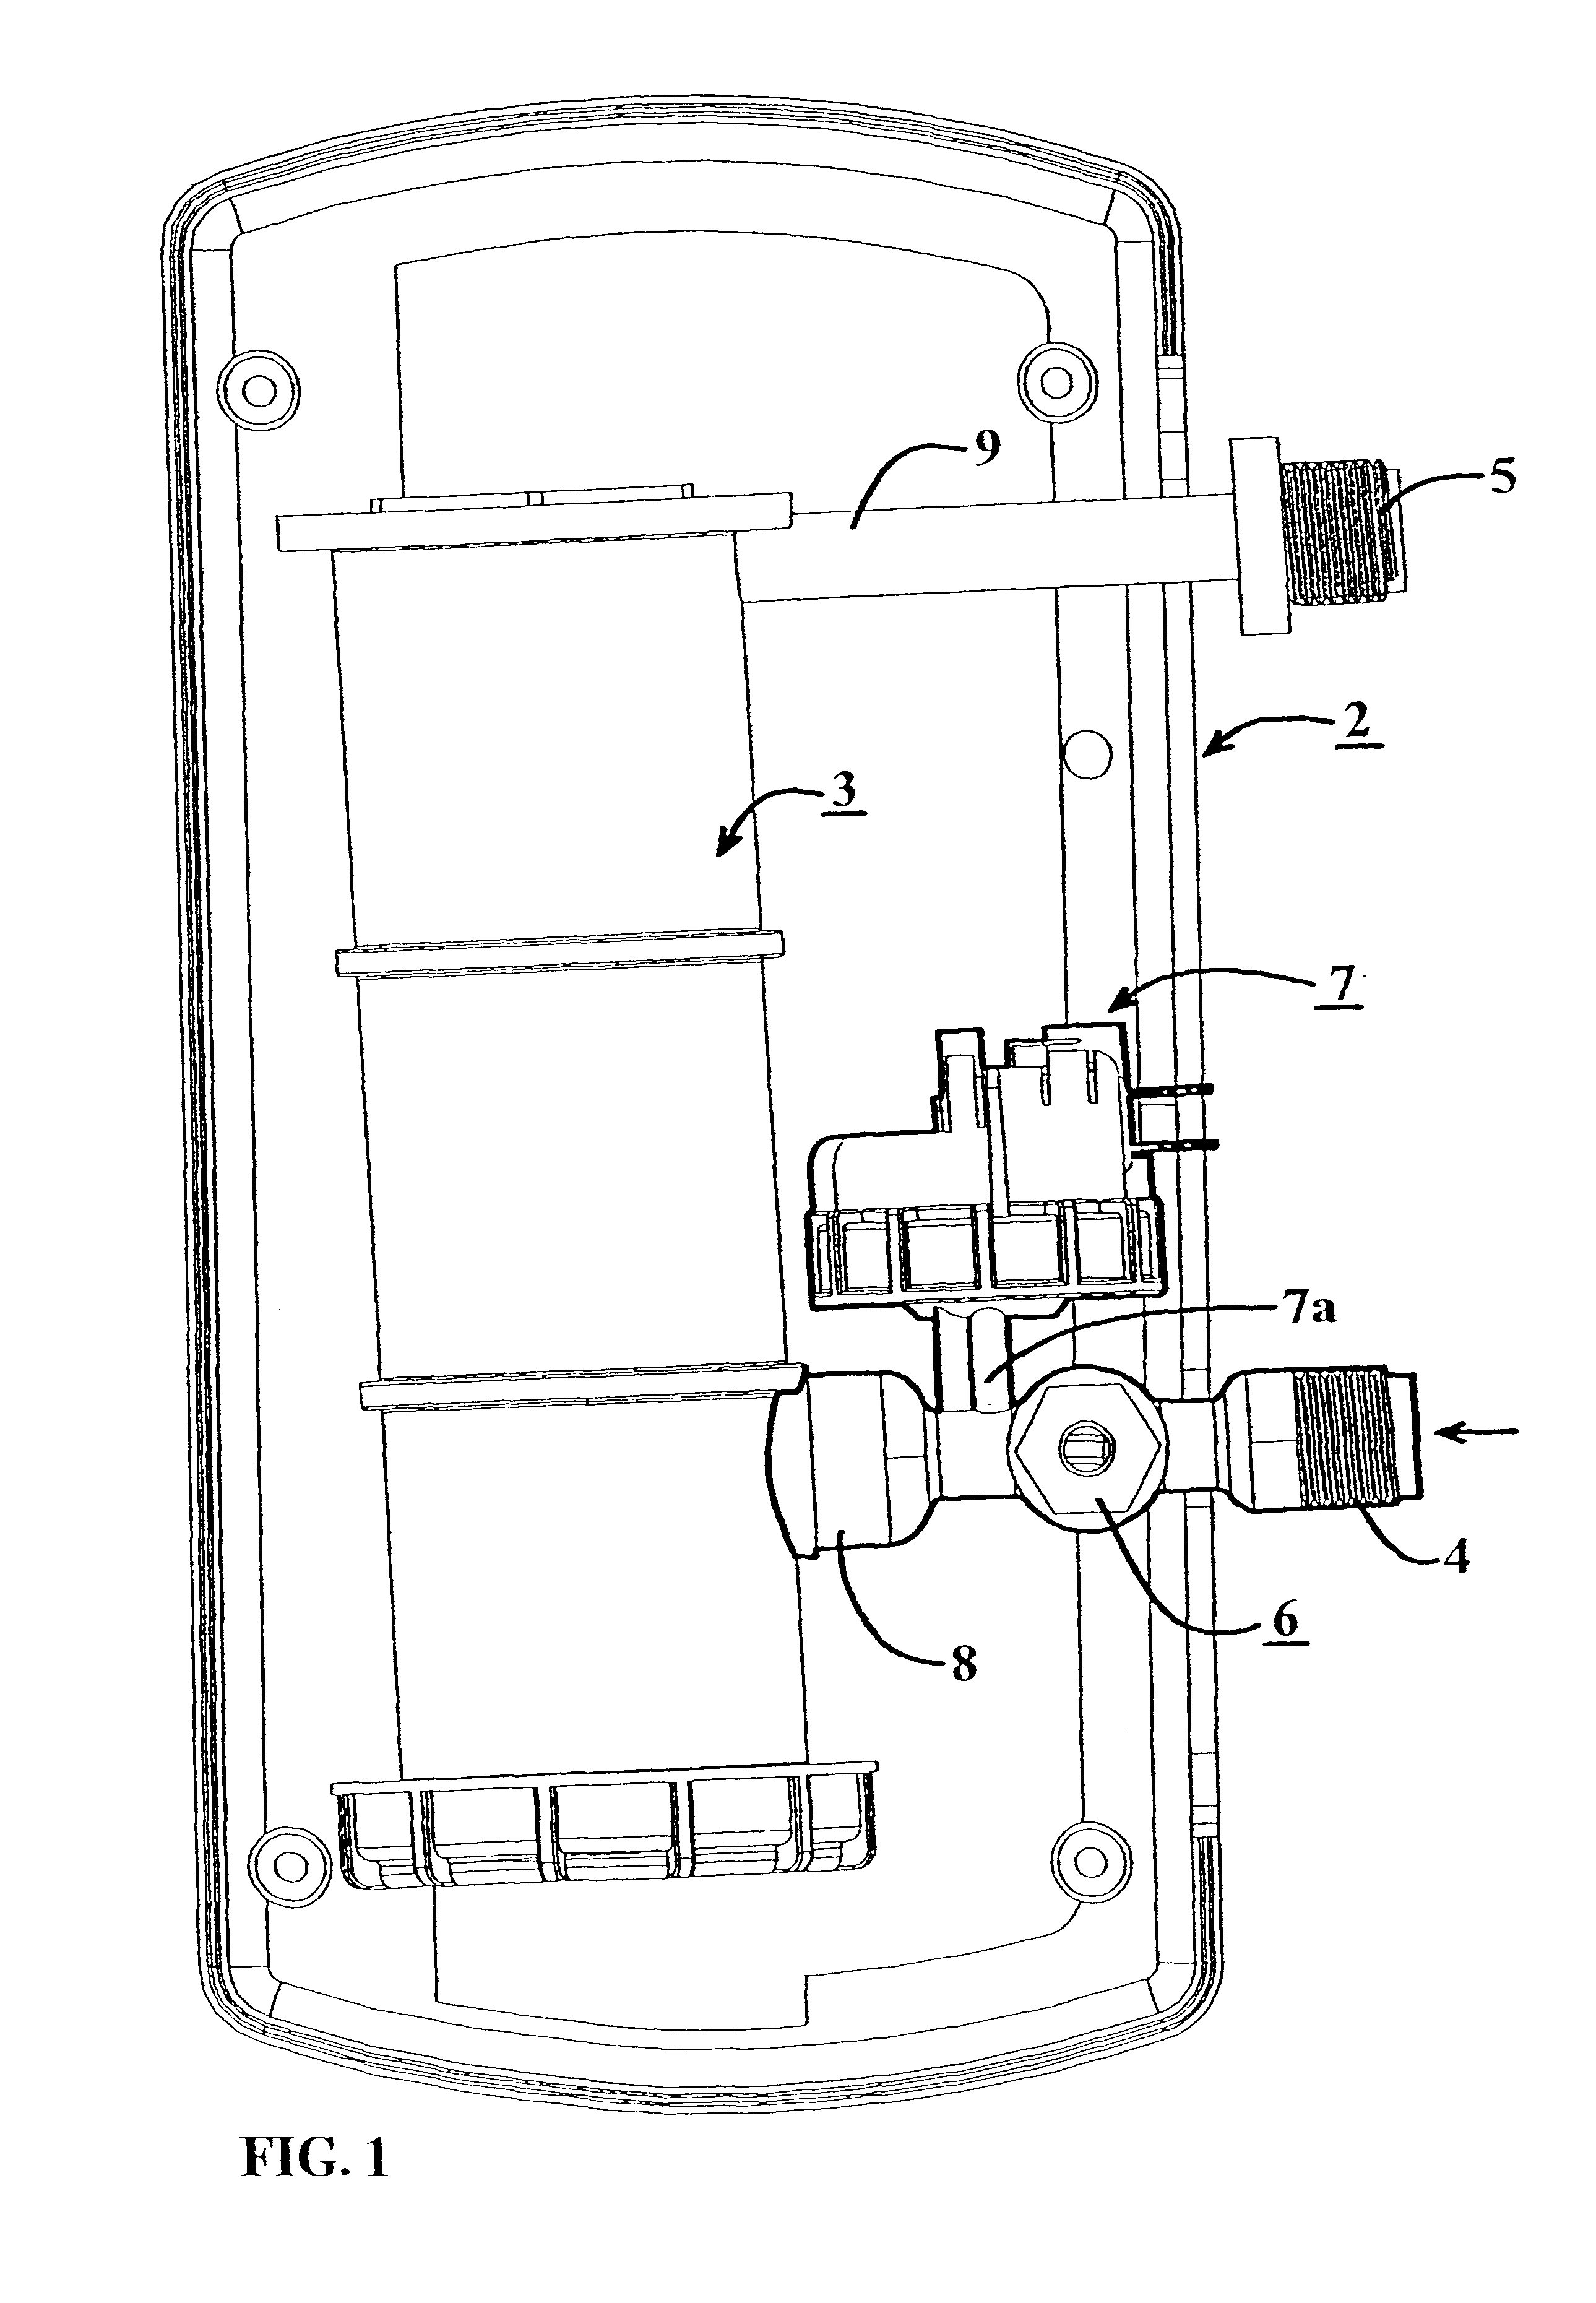 Electrical heating apparatus